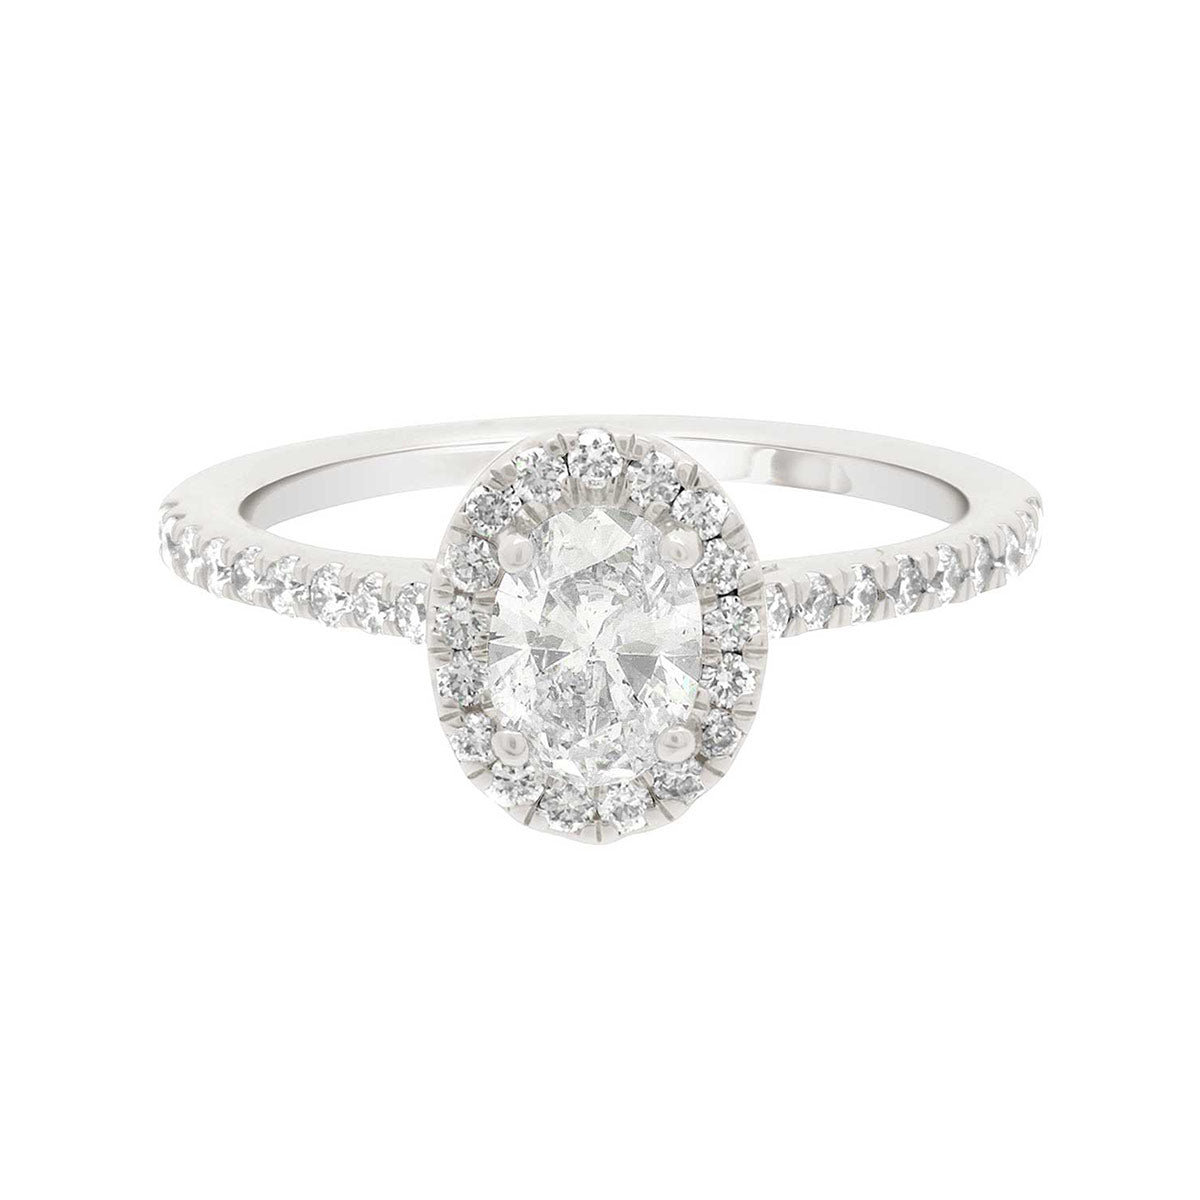 Oval Halo Engagement Ring with diamond shoulders in white gold